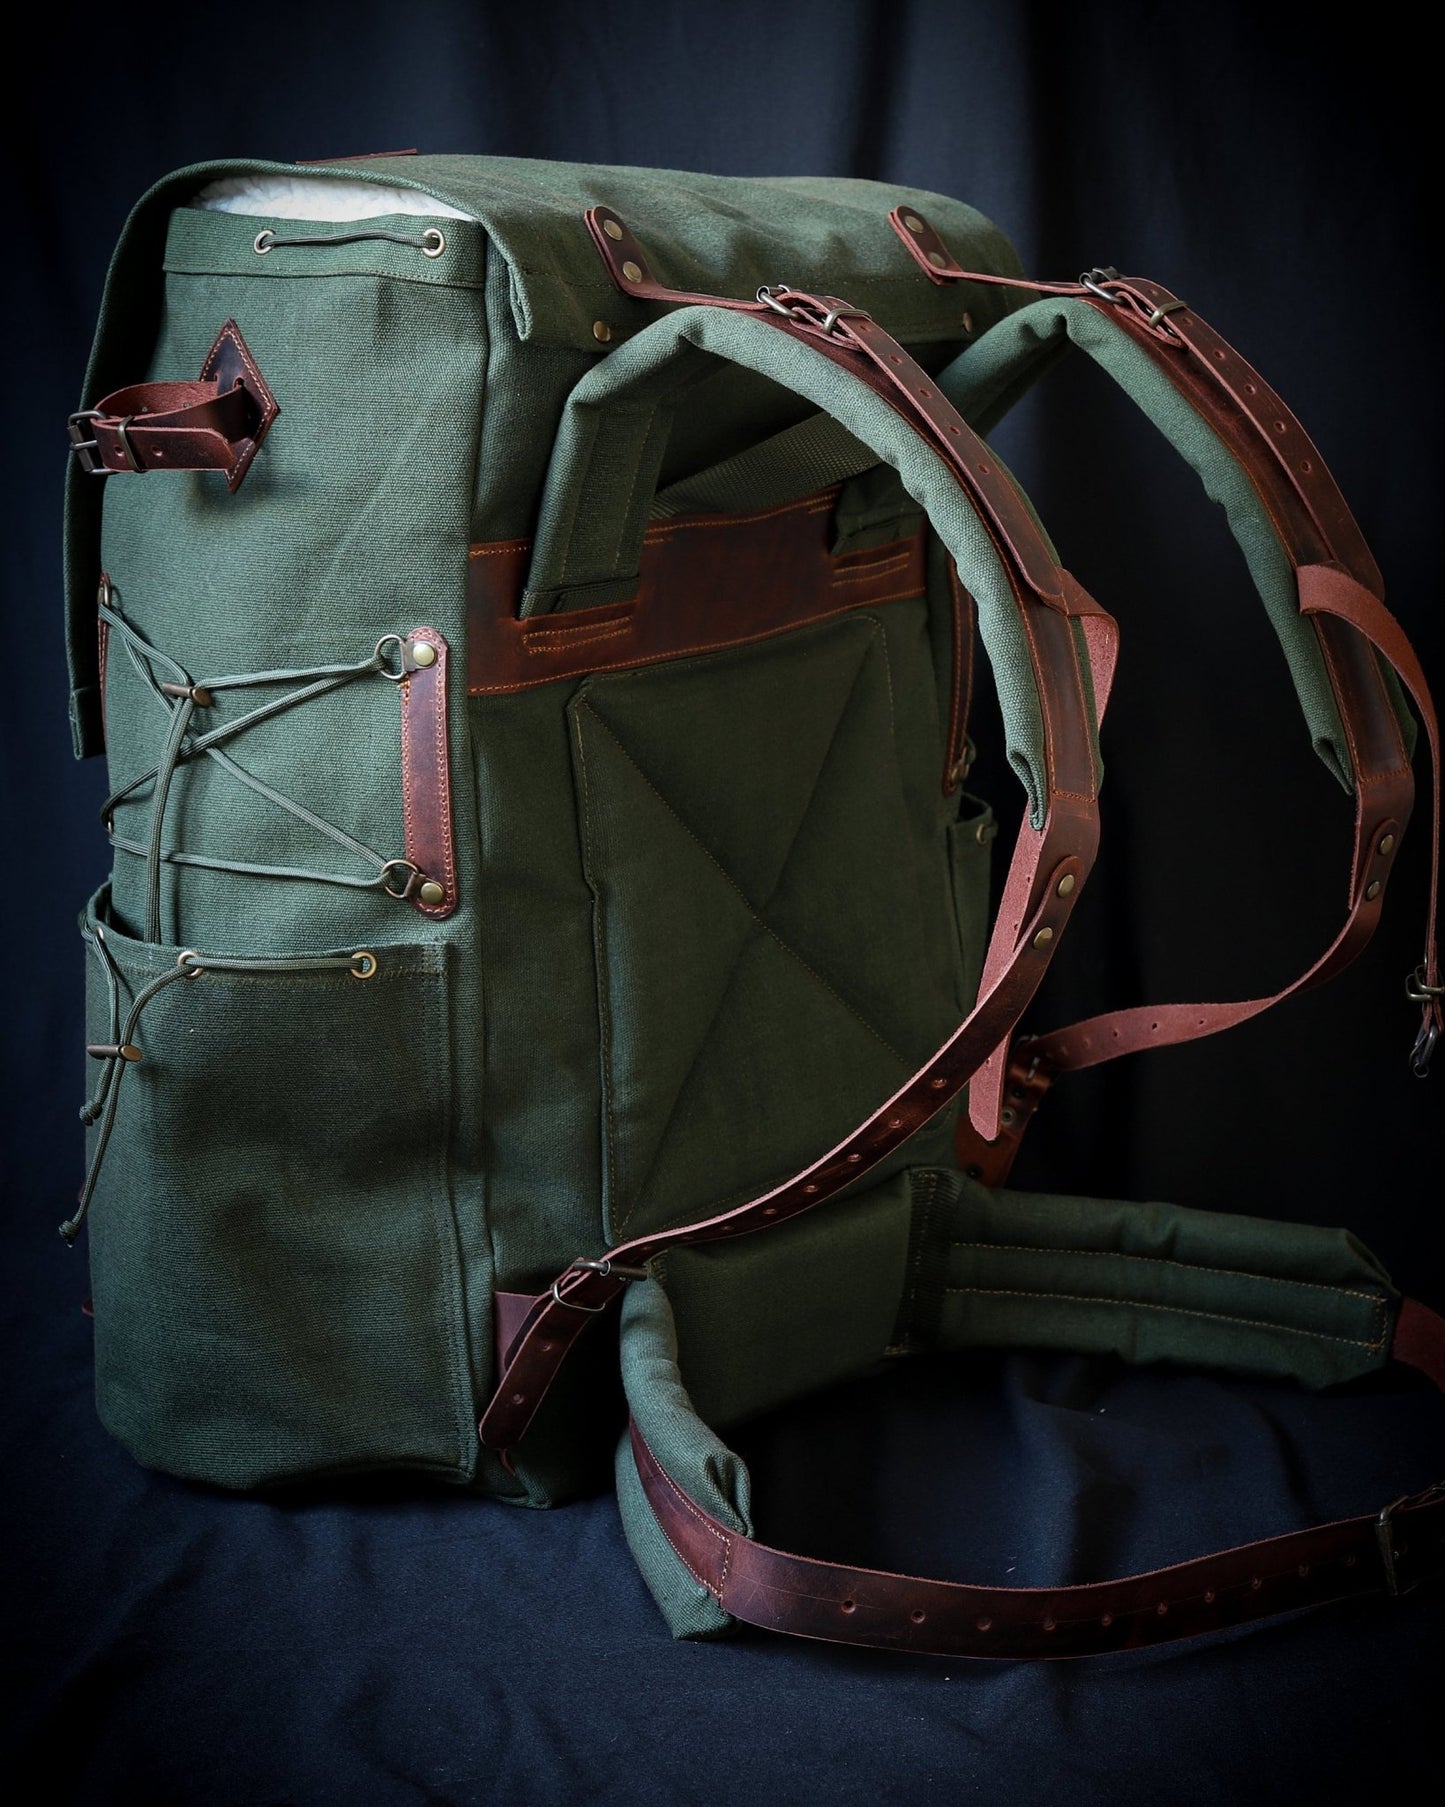 50L | 3 Pieces Left | Green, Brown, Dhaki Colours | Handmade Leather, Waxed Canvas Backpack for Travel, Camping, Bushcraft | Personalization  99percenthandmade   